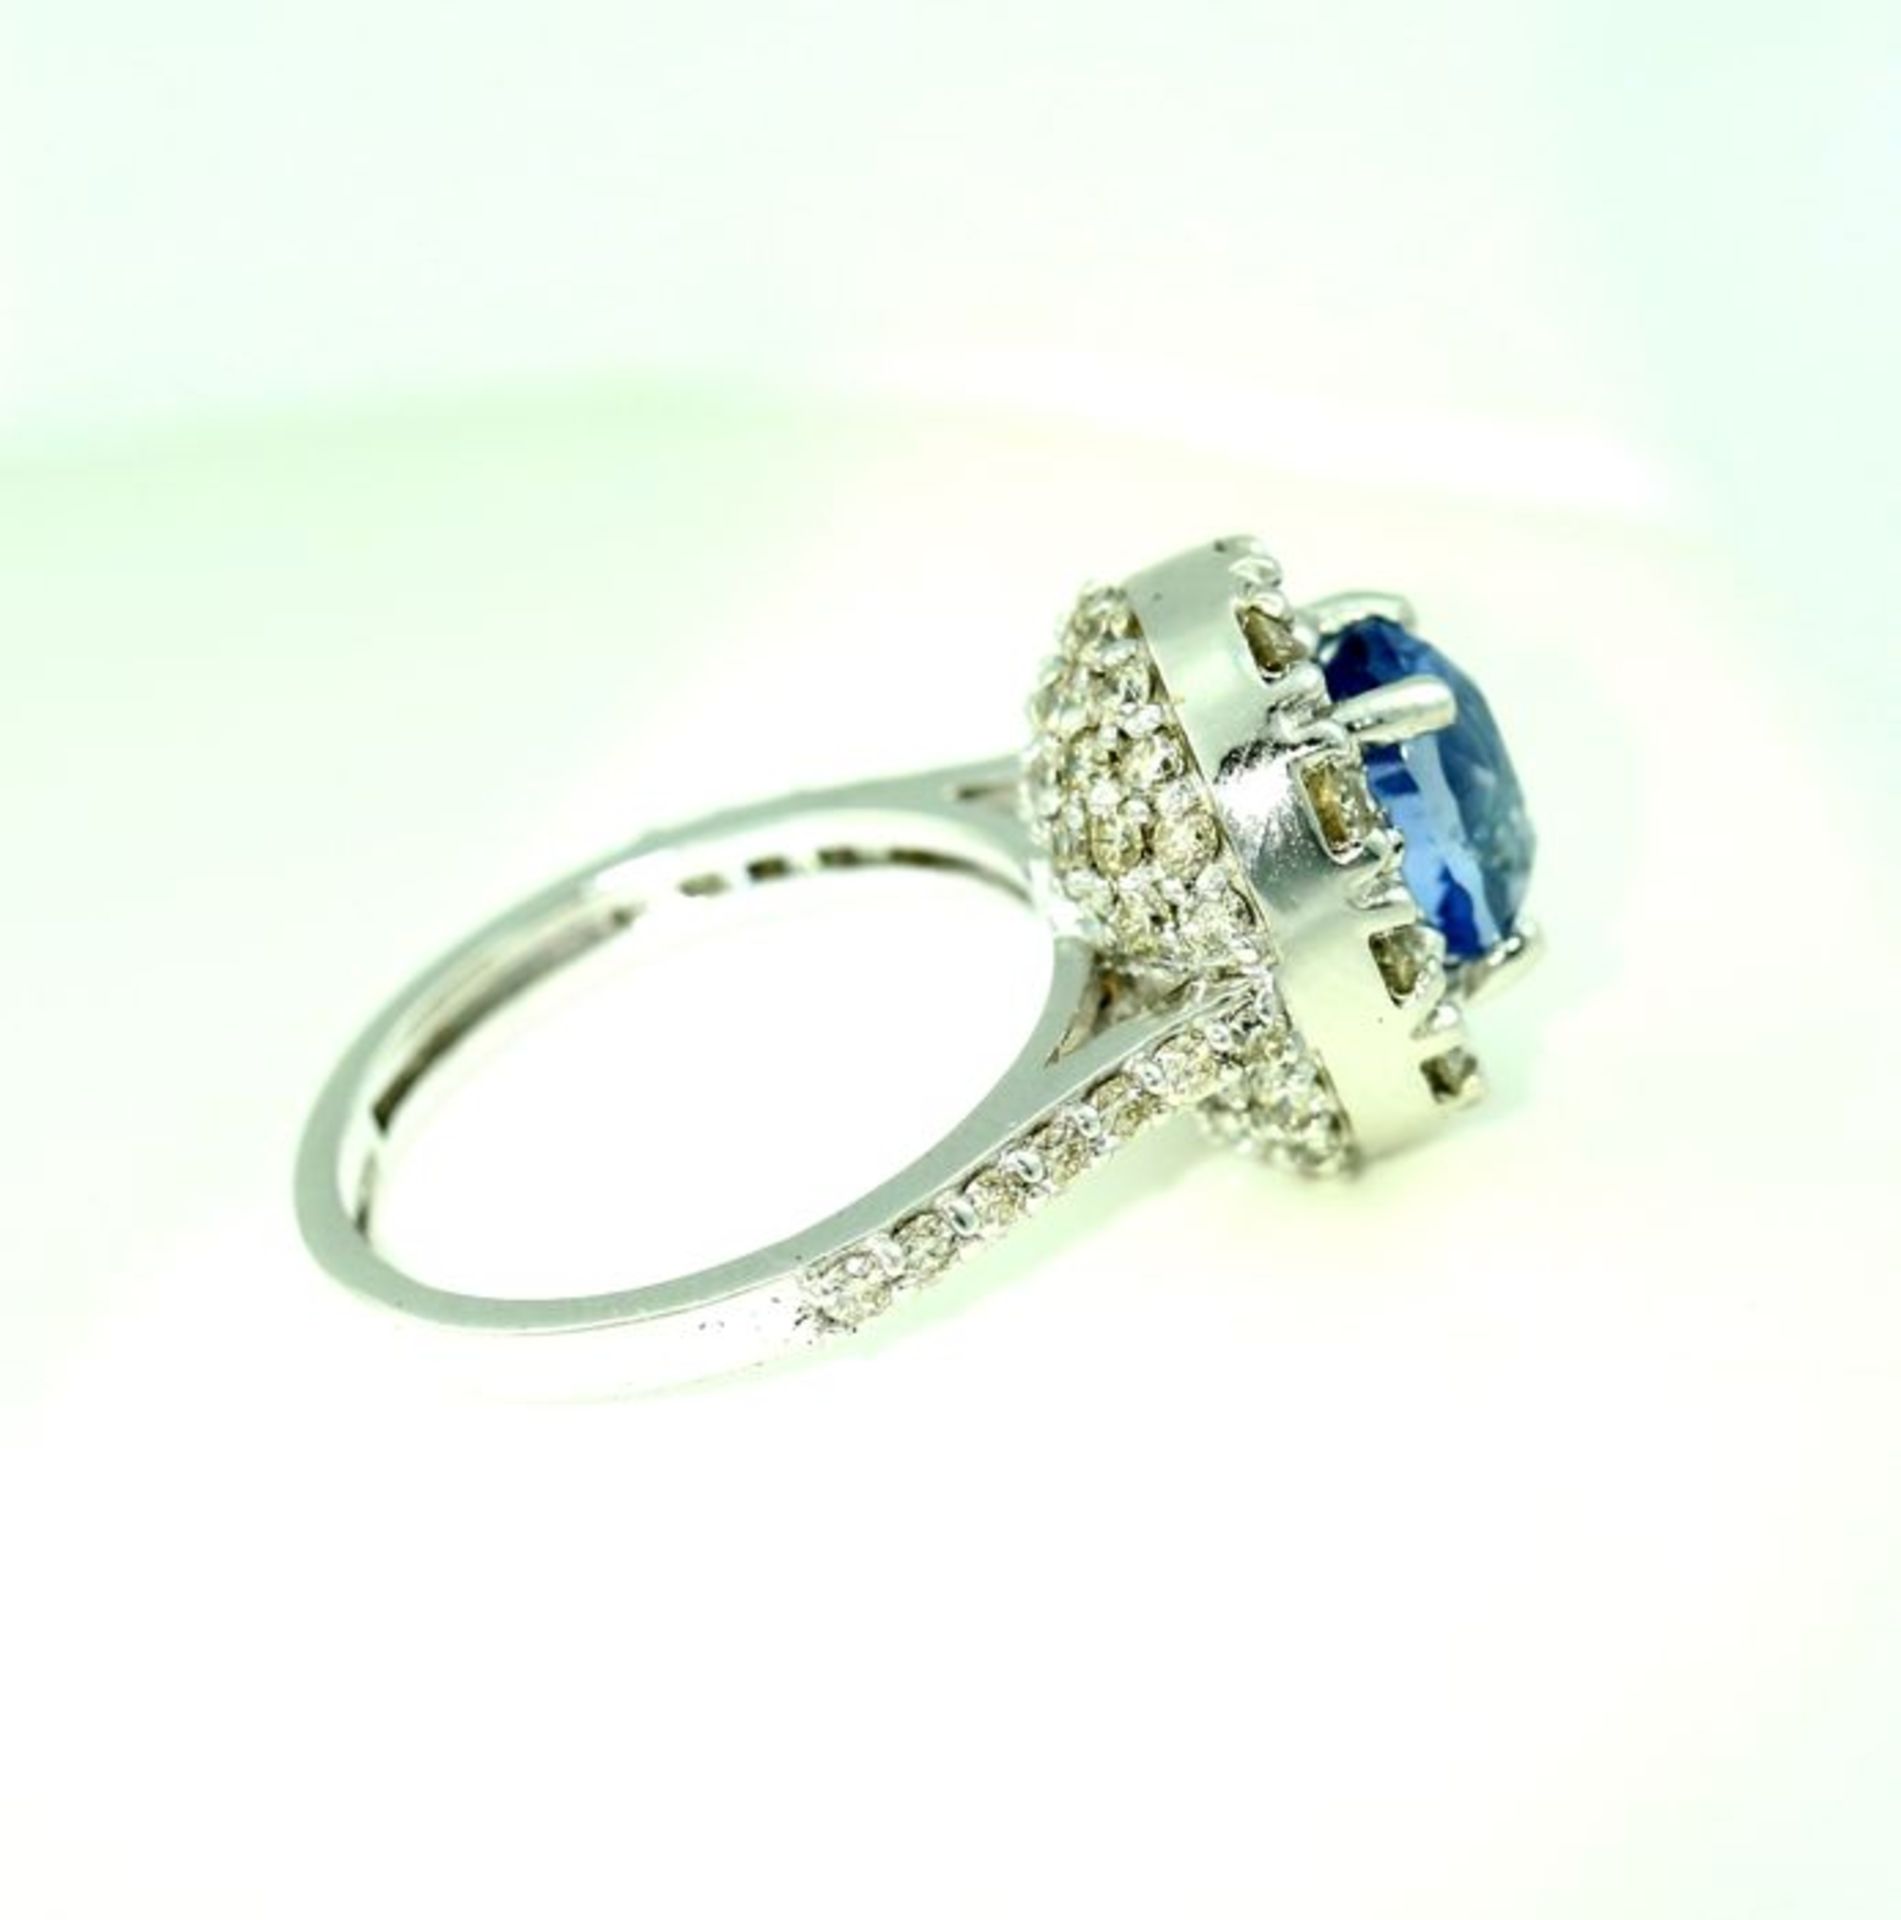 14 K / 585 White Gold Blue Sapphire (IGI certified) and Diamond Ring - Image 8 of 10